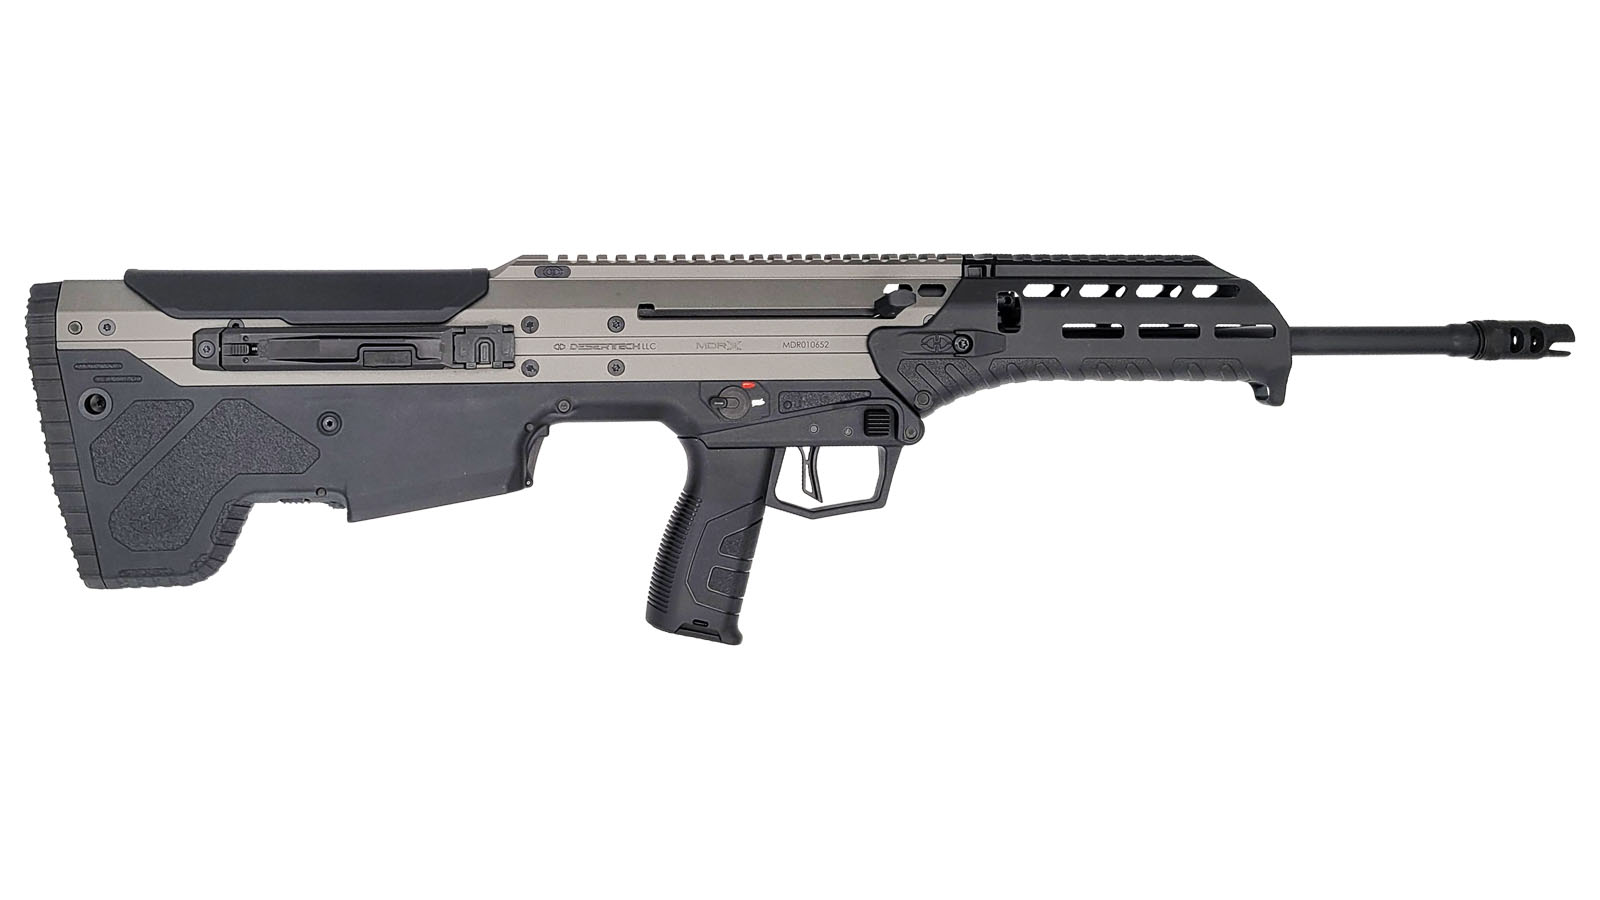 MDRx Rifle, 556NATO 223Rem 20" 30rd Forward-Ejection Tungsten